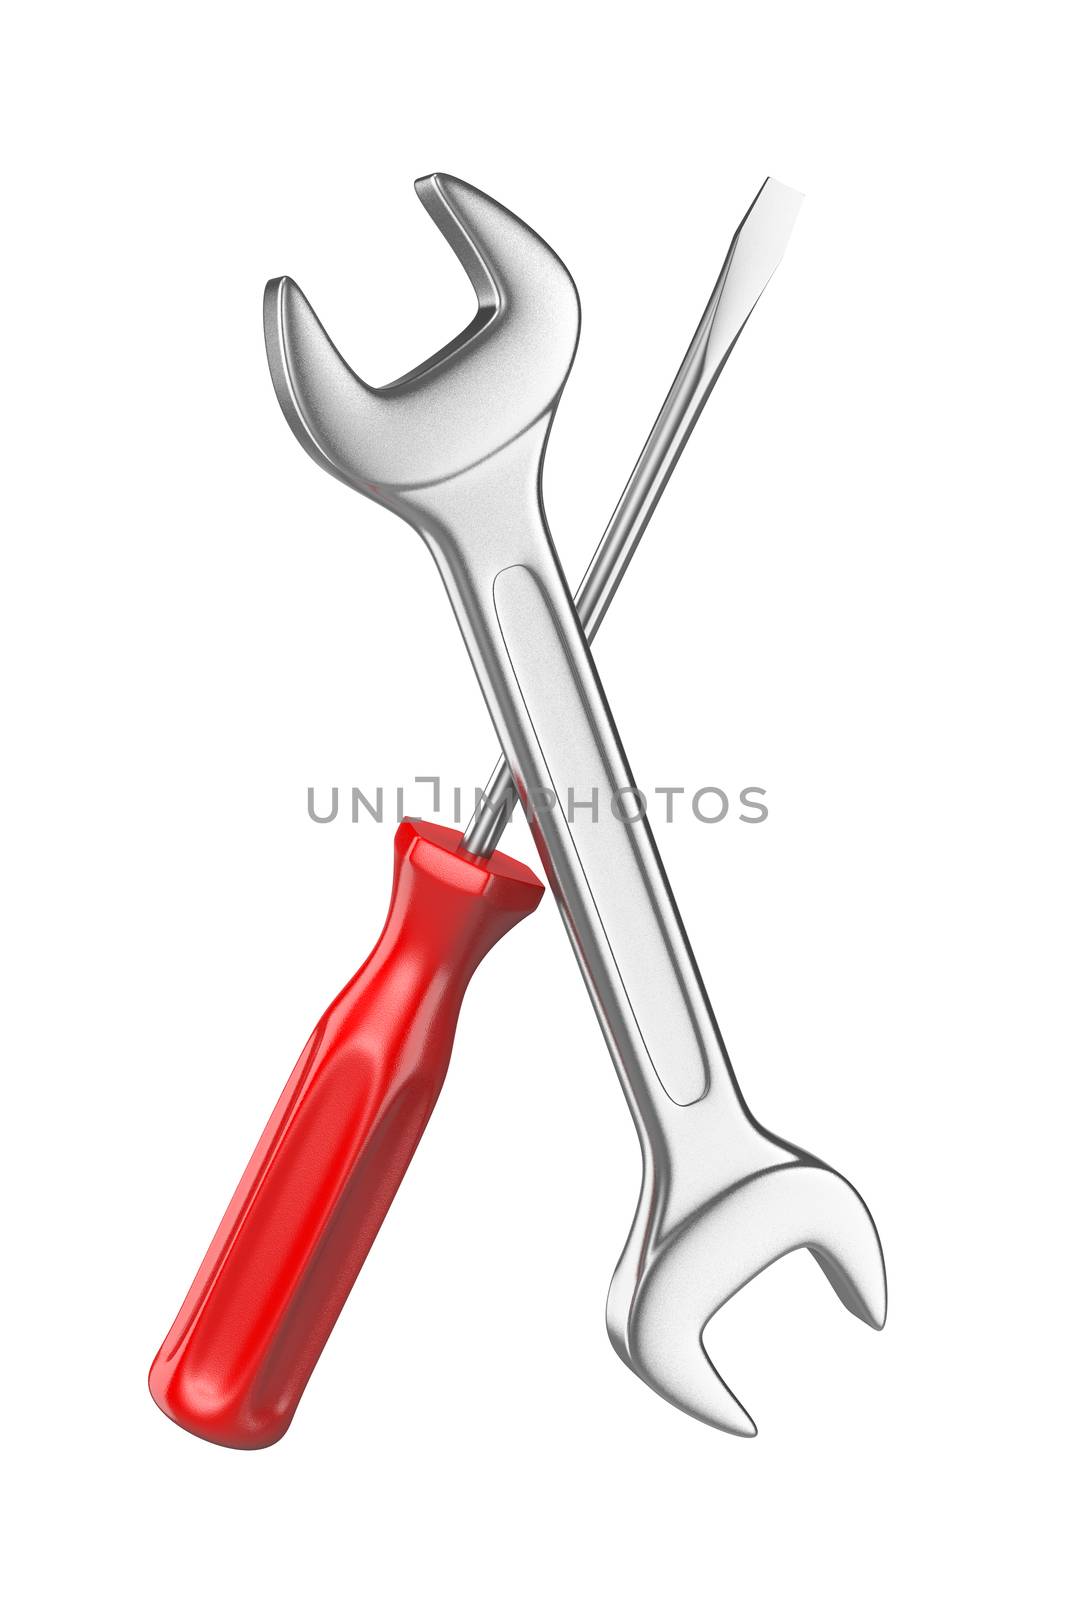 Spanner and Screwdriver Isolated on White Background 3D Illustration